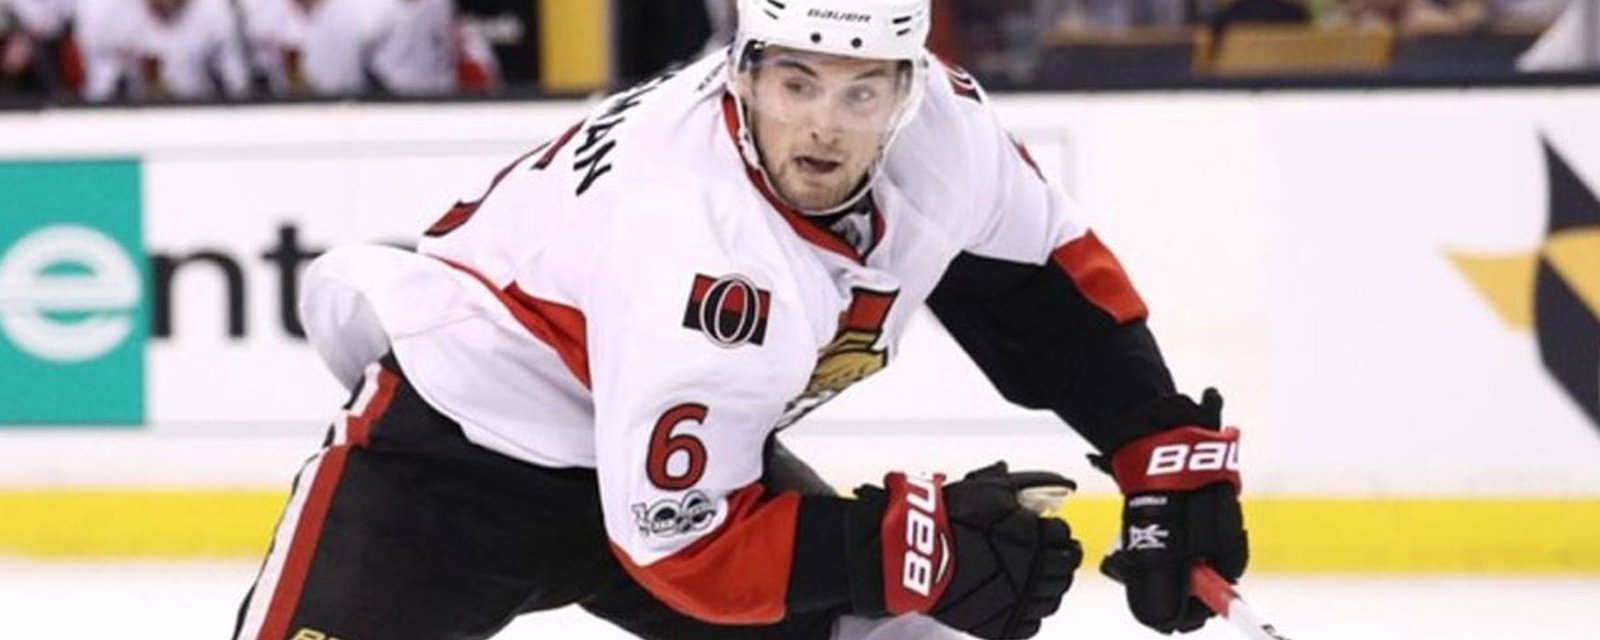 Breaking: Bad news for Wideman and the Sens 